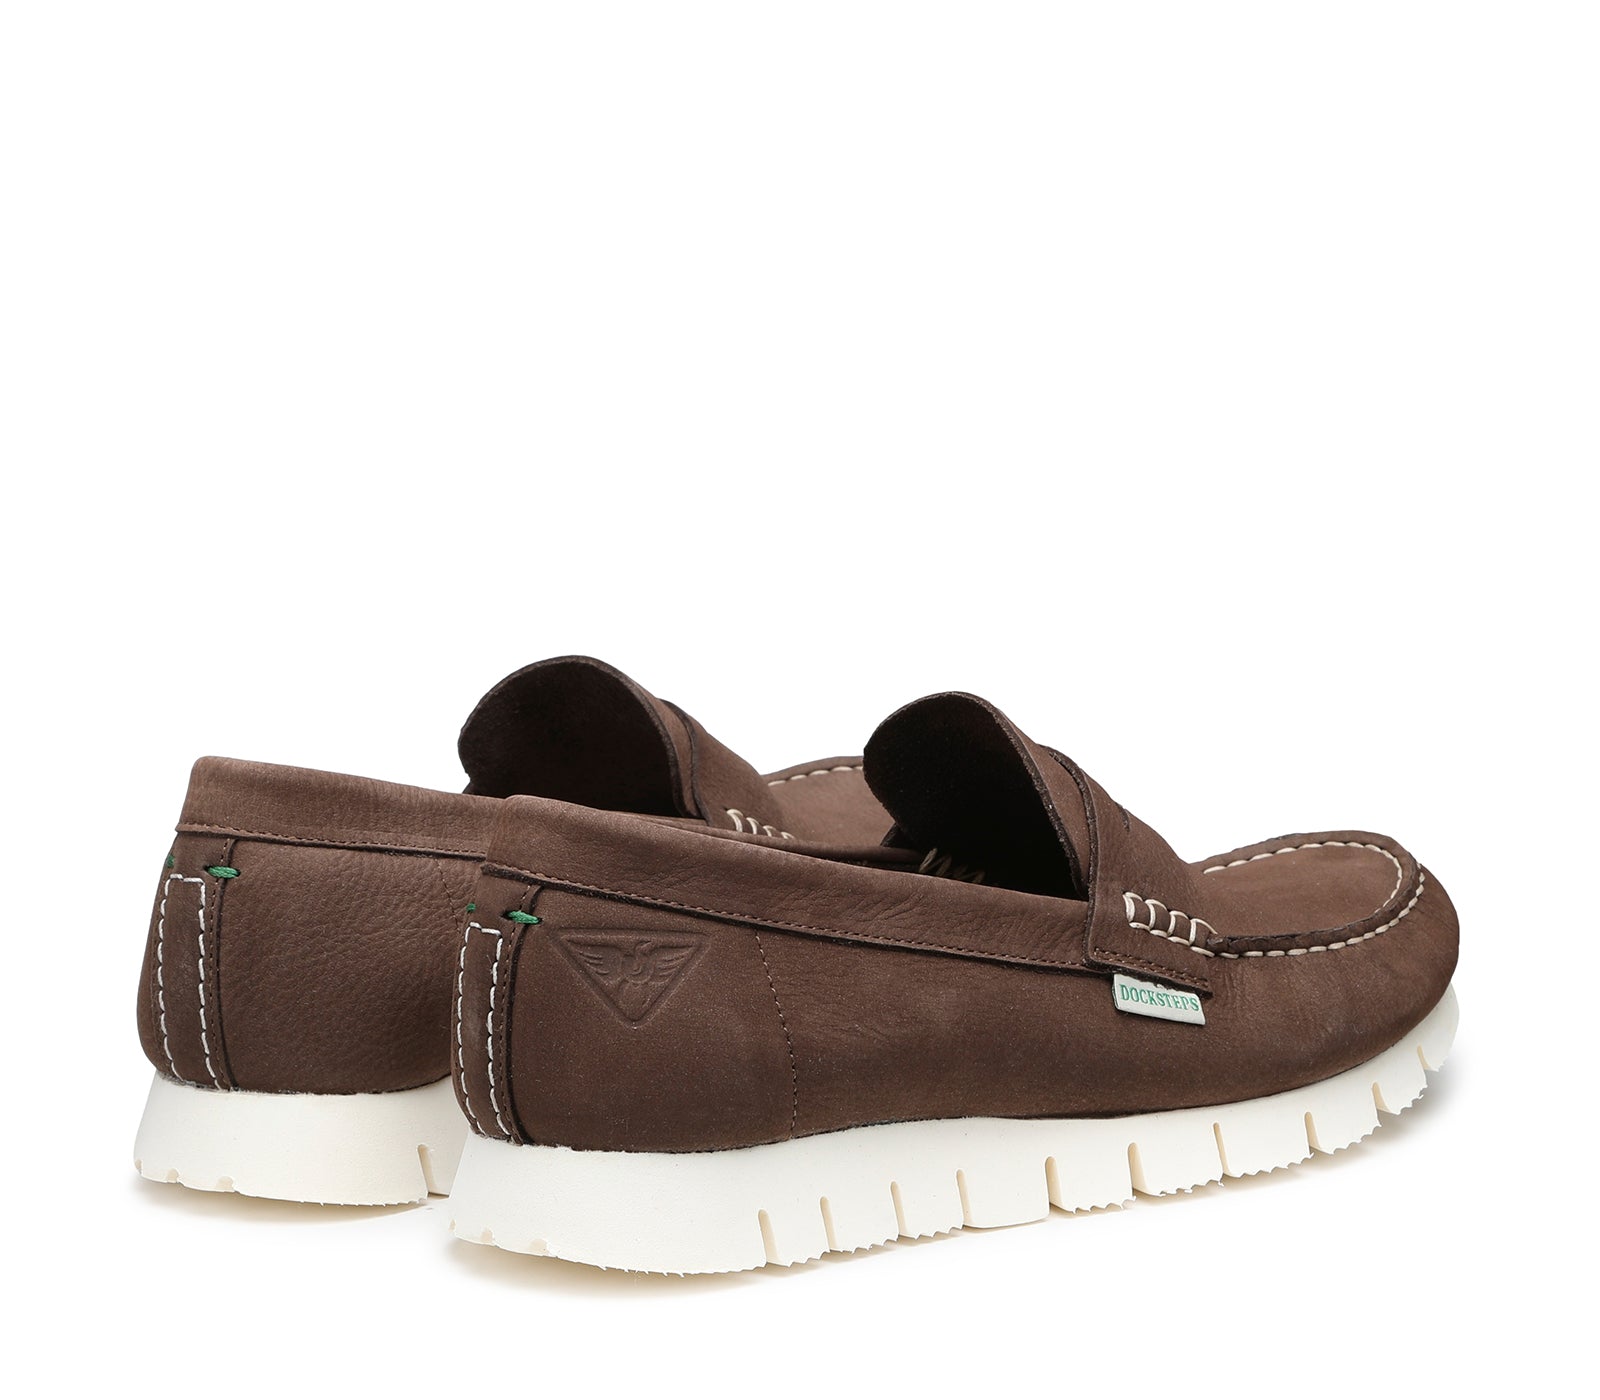 Sustainable Moccasin in Naval Brown Nubuck and White Sole